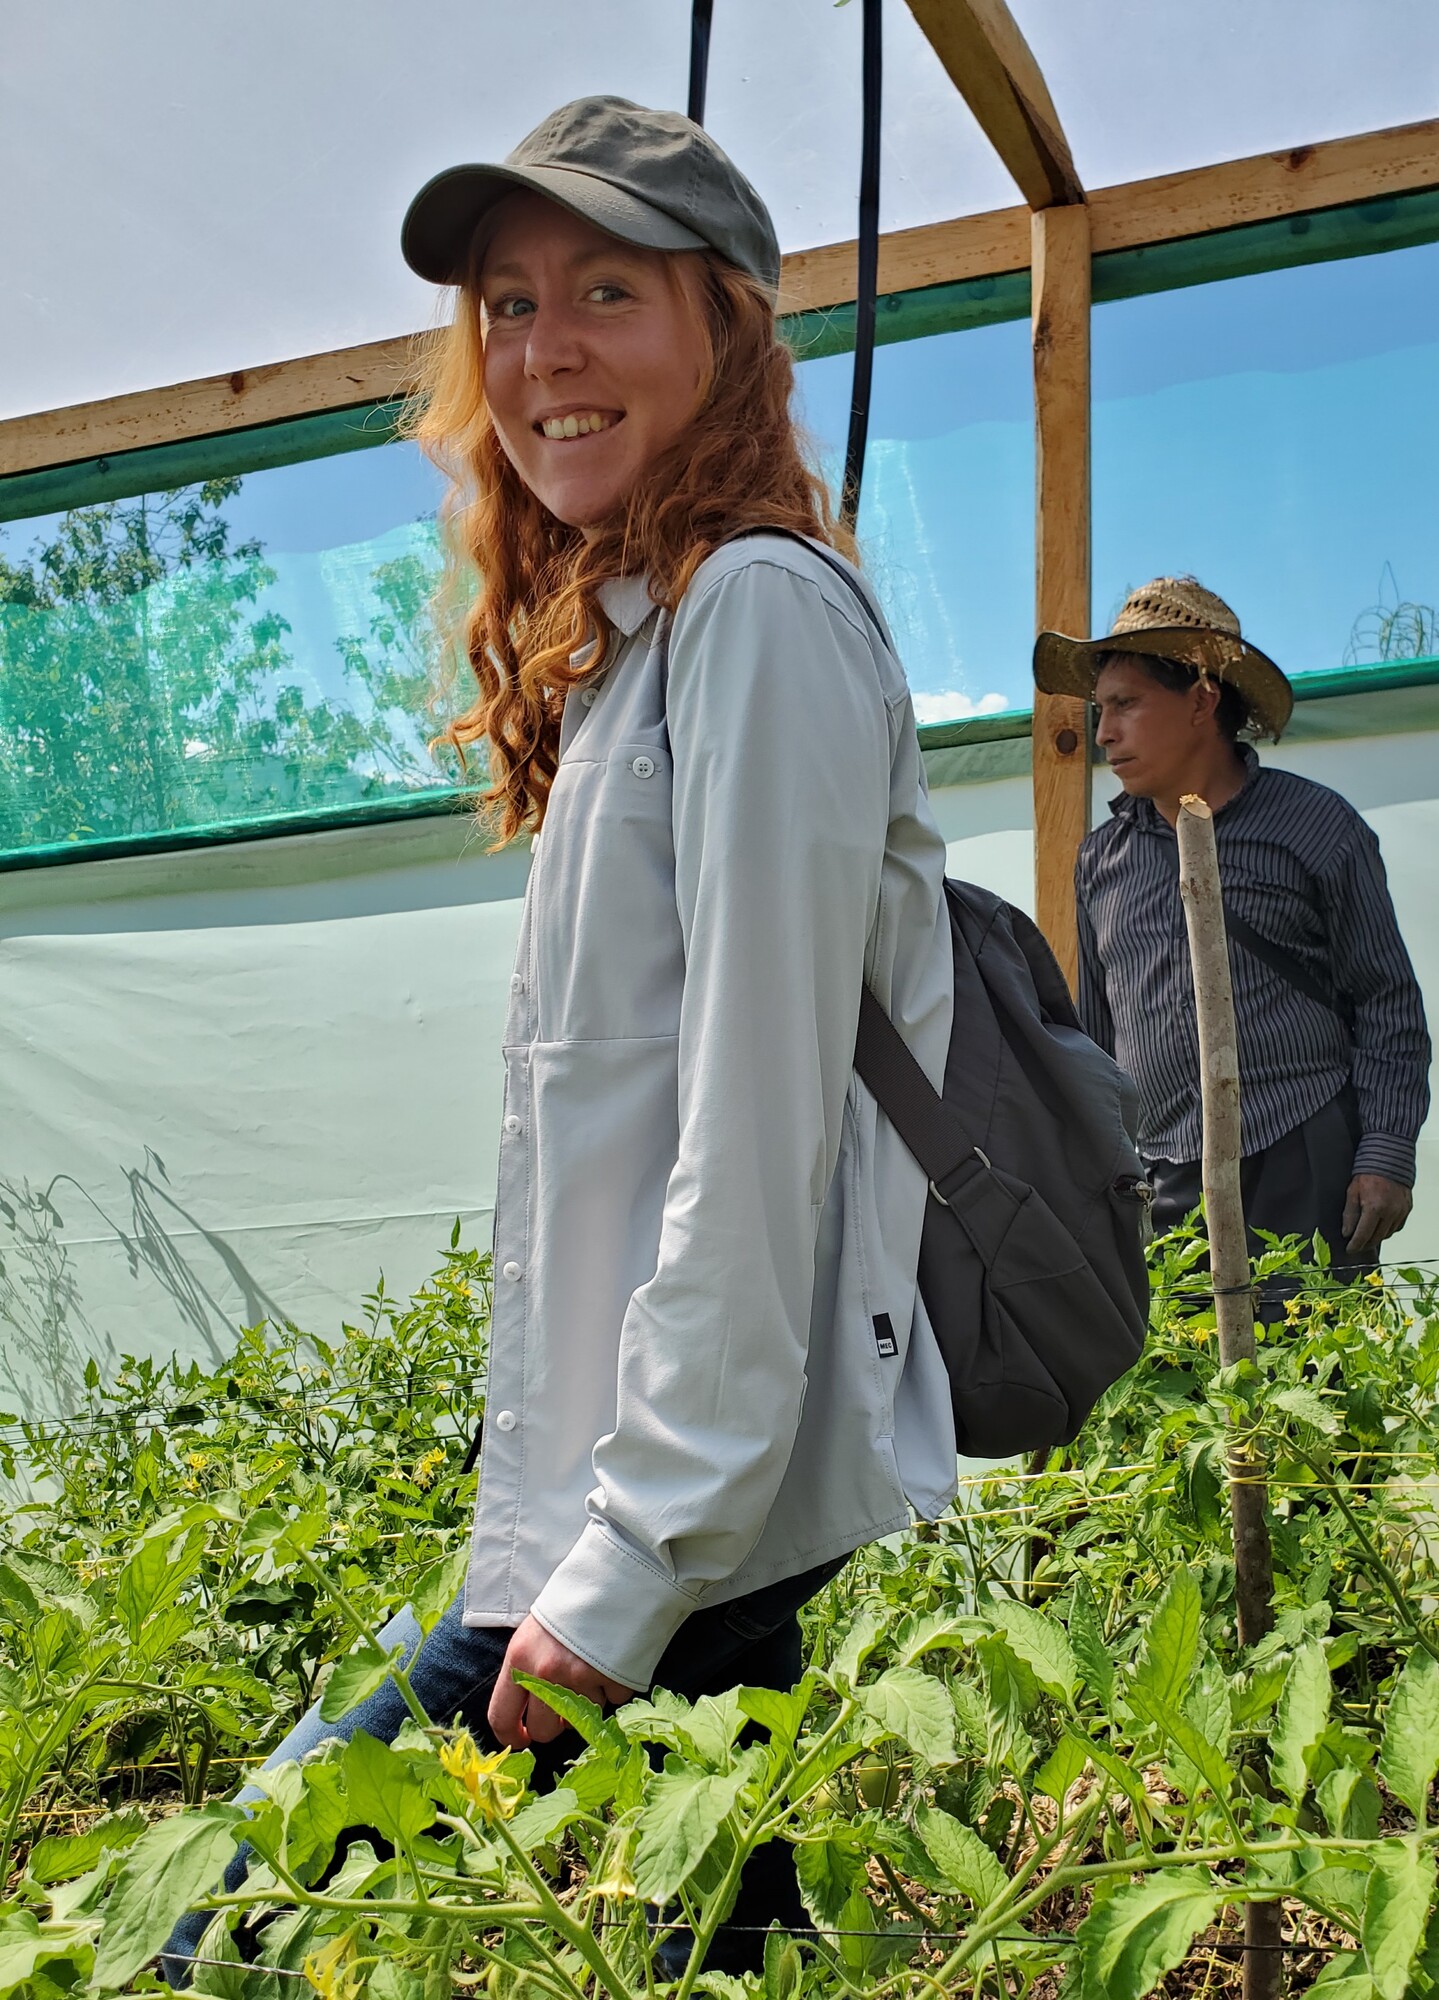 A young woman with red hair and a ball cap stands in a greenhouse surrounded by green leafy plants